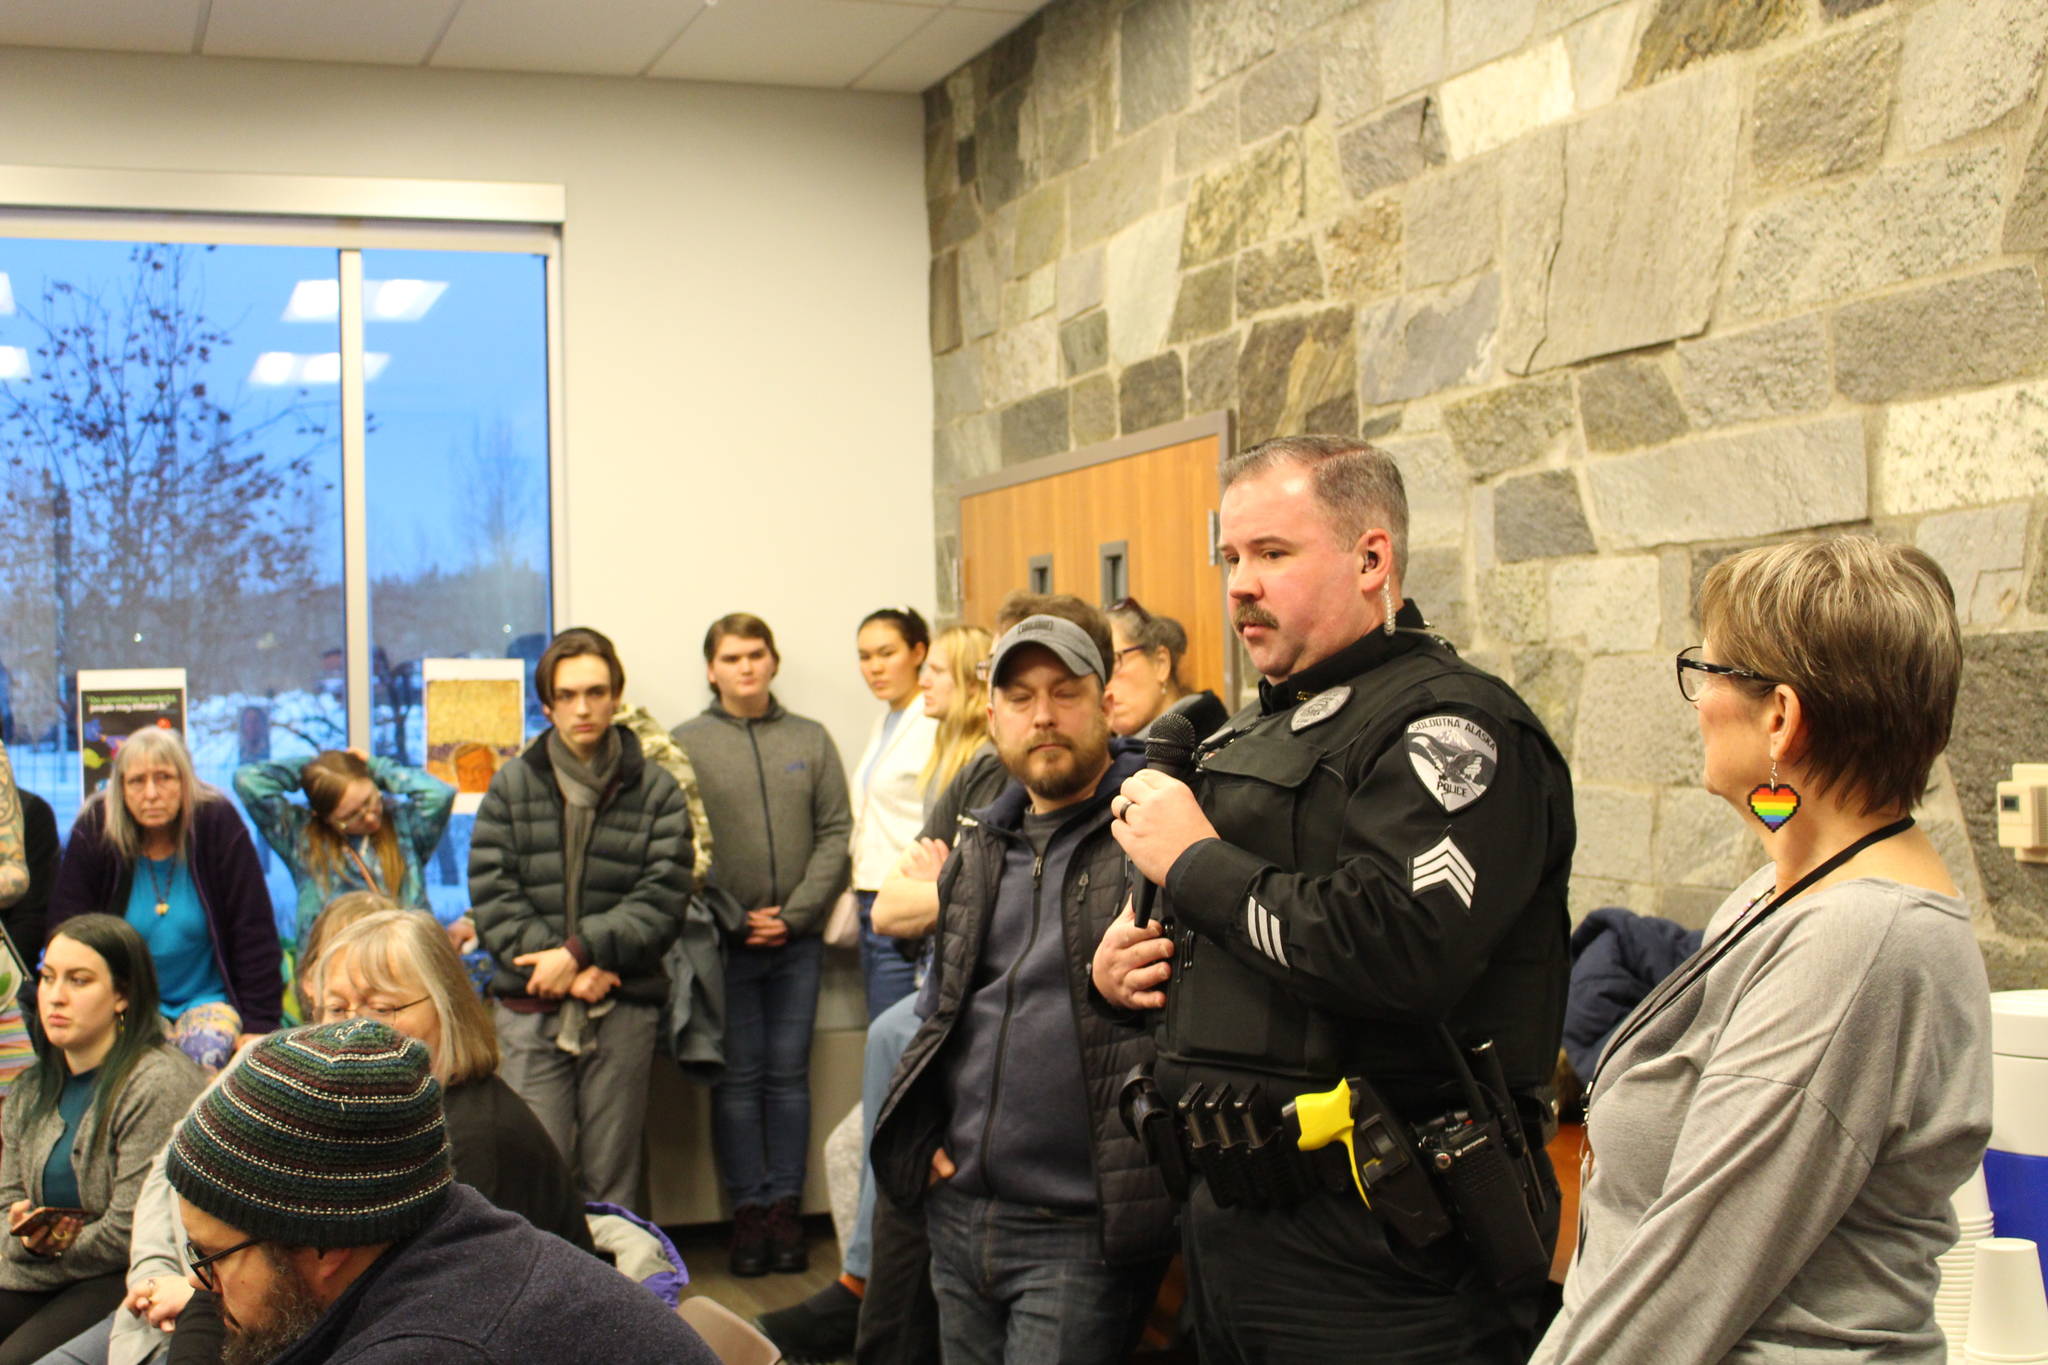 Sgt. Tobin Brennan with the Soldotna Police Department speaks at the LGBTQ Town Hall at the Soldotna Public Library in Soldotna, Alaska on Jan. 4, 2020. (Photo by Brian Mazurek/Peninsula Clarion)